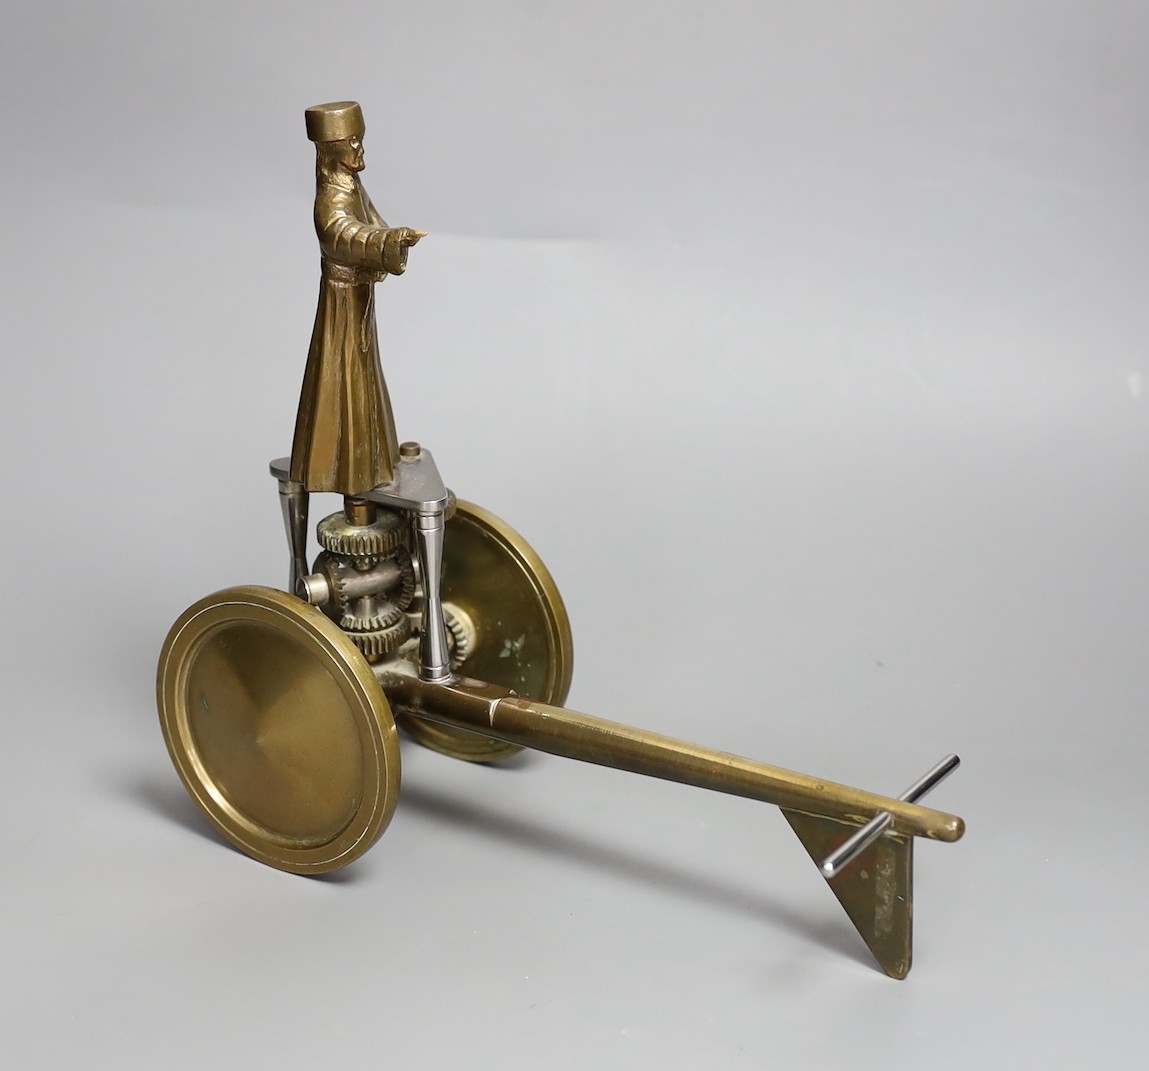 A limited edition bronze and steel two-wheeled cart, fully geared with rotating figural mount, 3/100 dated 1977, length 25cm